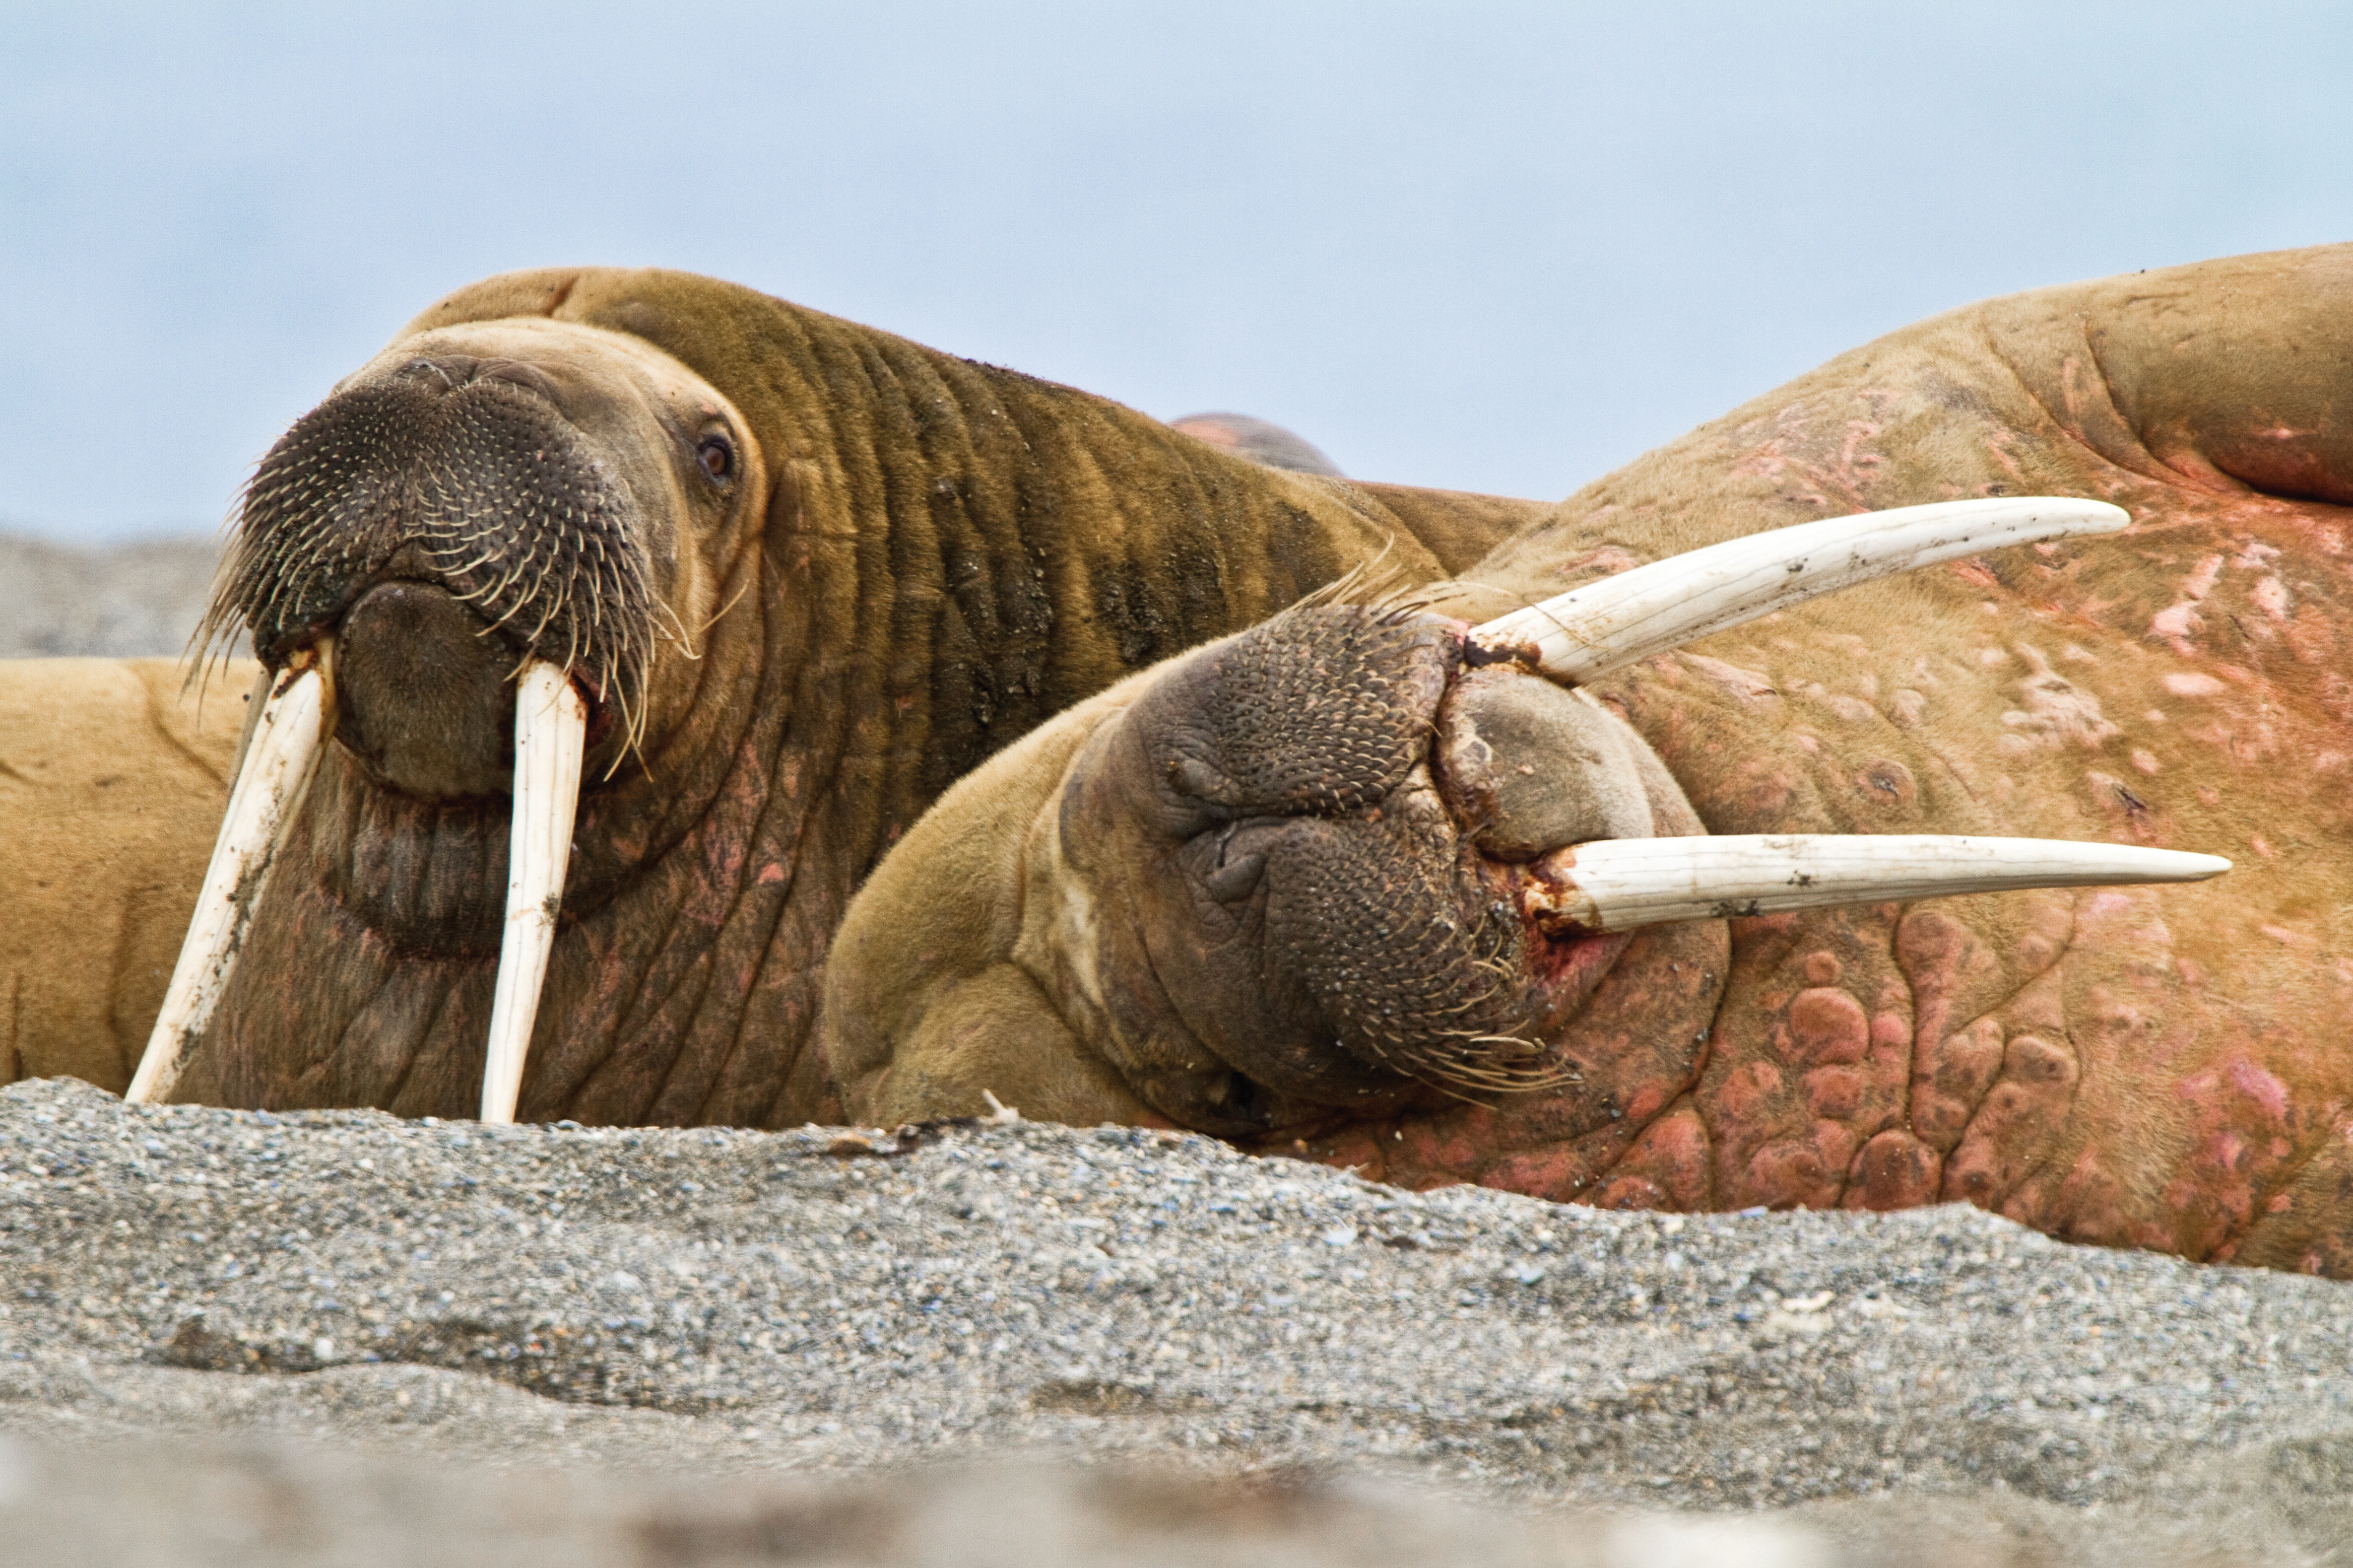 svalbard Adult male walrus in the Svalbard Archipelago. * Photo: Lindblad Expeditions